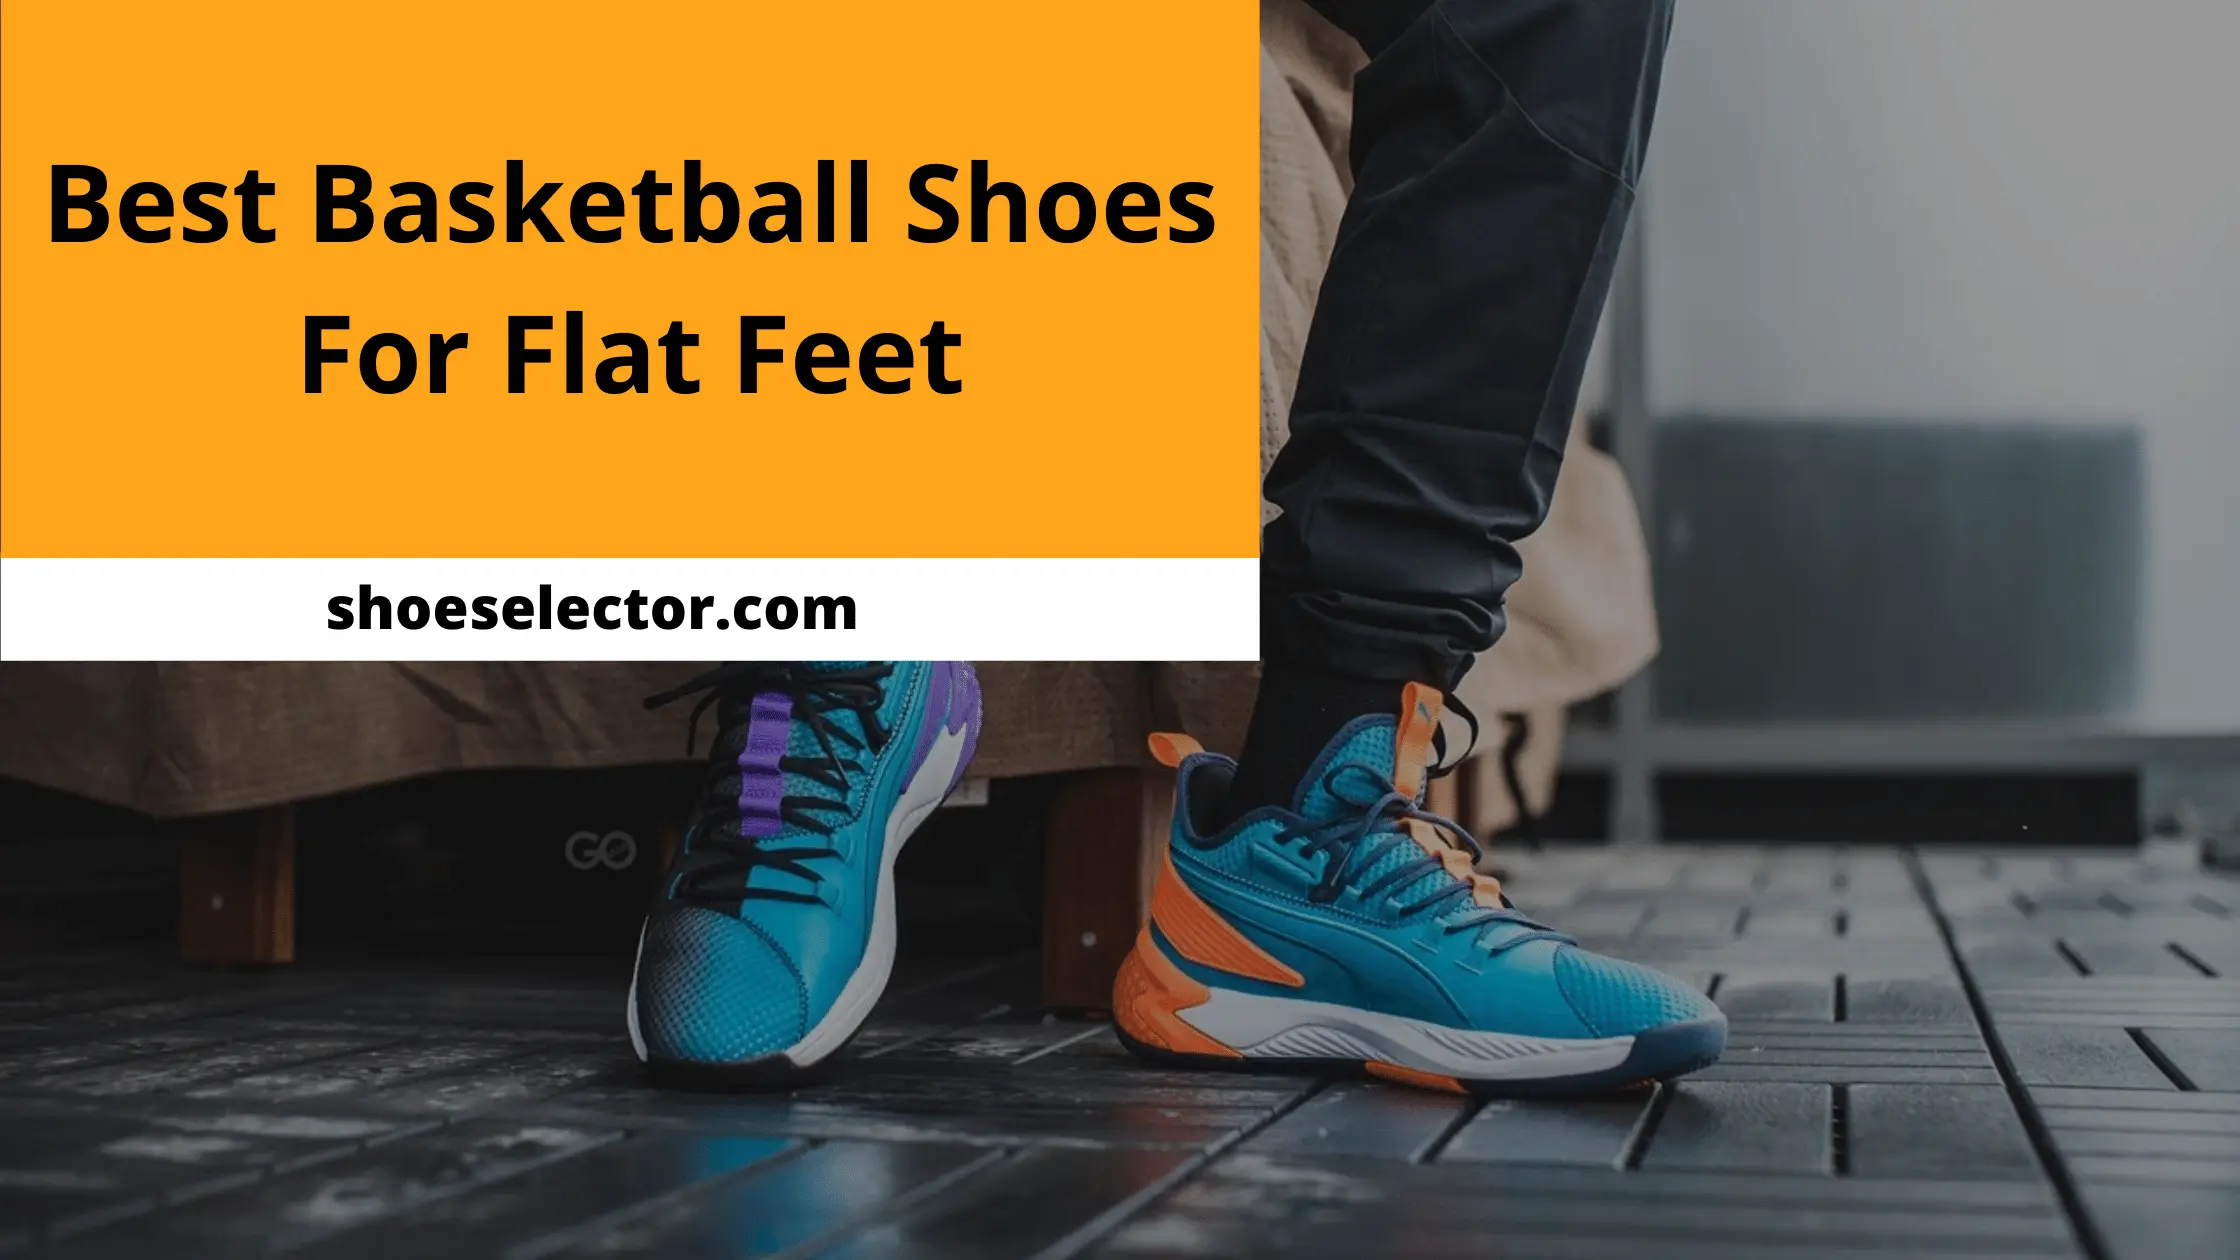 Best Basketball Shoes For Flat Feet With Products Comparison